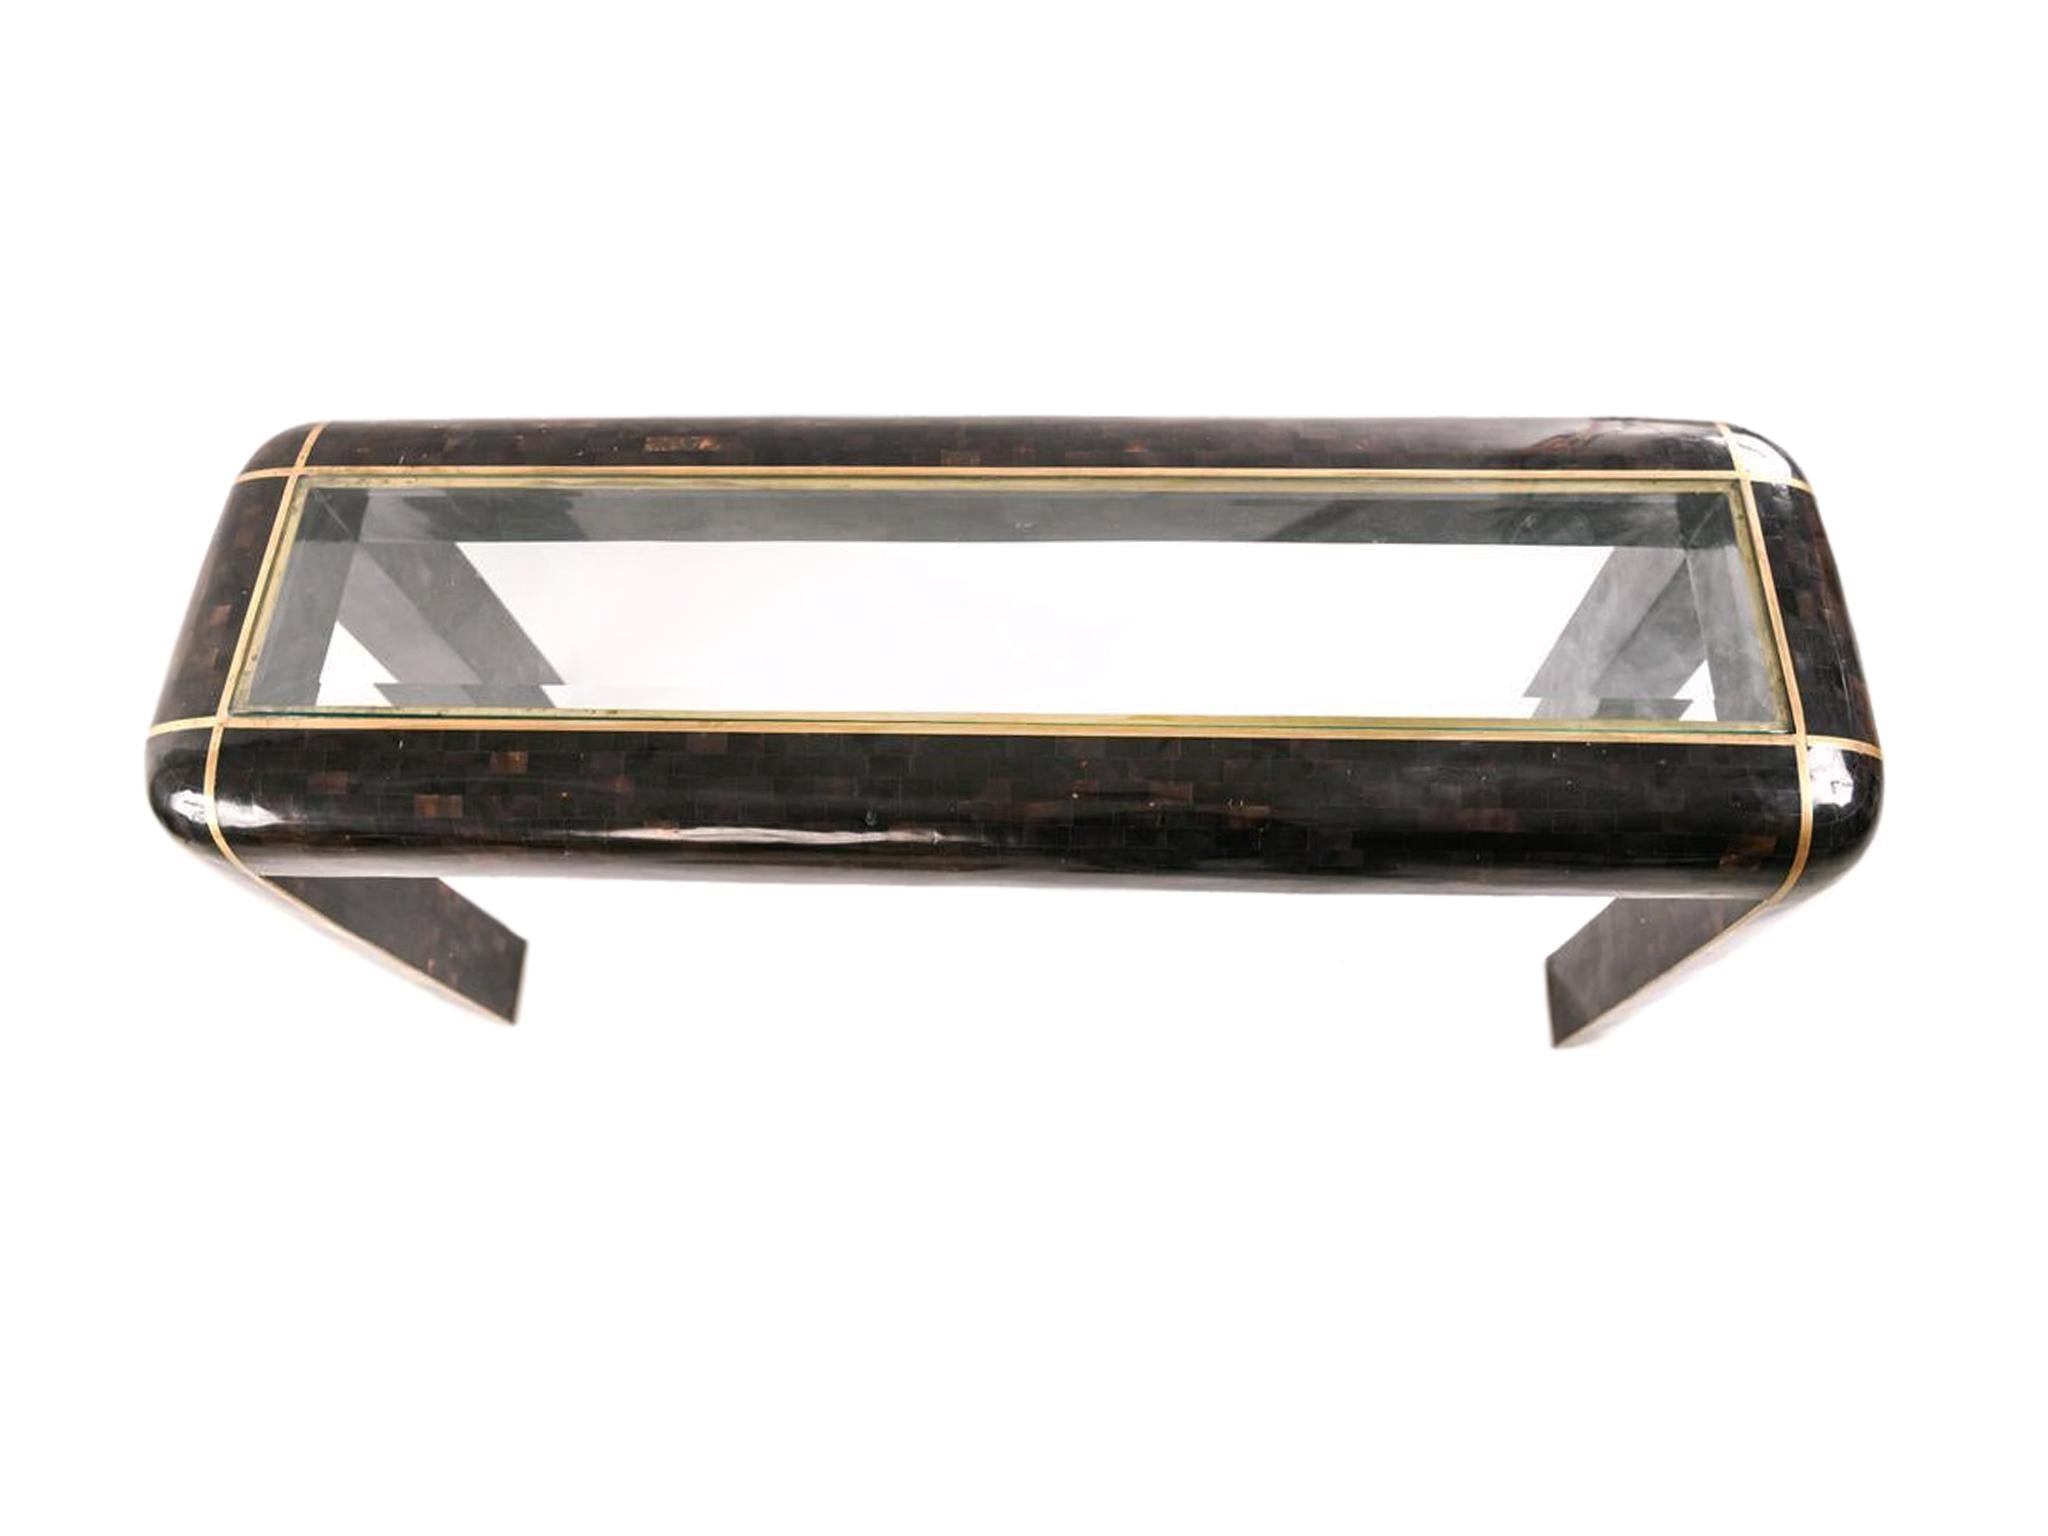 1980s Maitland-Smith console table crafted with tessellated Horn, beveled glass insert top, and brass trimming. This luxe table is characteristic of Maitland-Smith's expert craftsmanship with their attention to detail. Hollywood Regency,